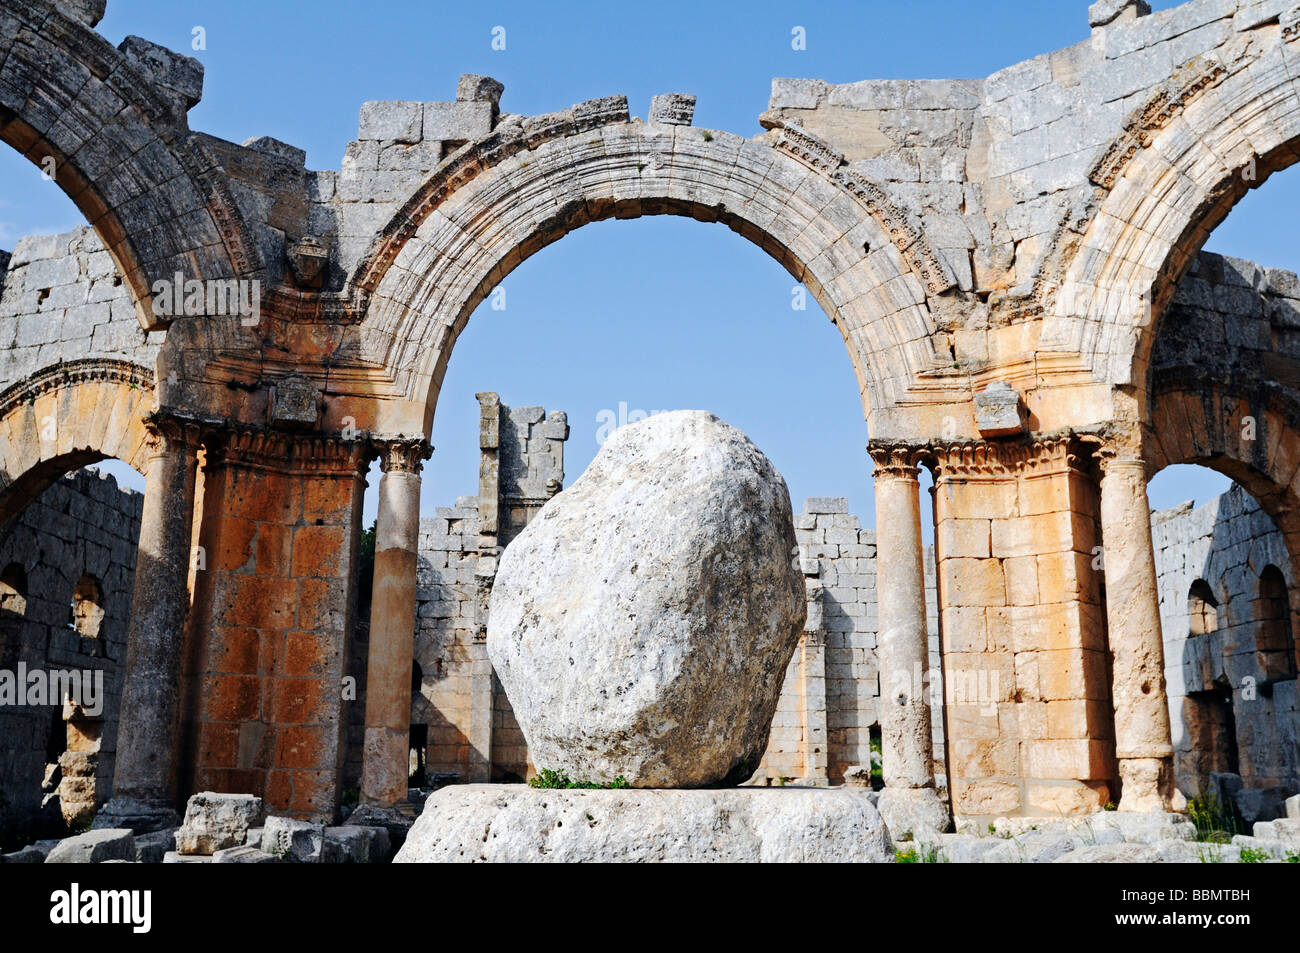 Stone of the Stylite or Pillar-Saint Simeon in the Simeon Monastery in Quala'at Samaan, Dead Cities, Syria, Asia Stock Photo